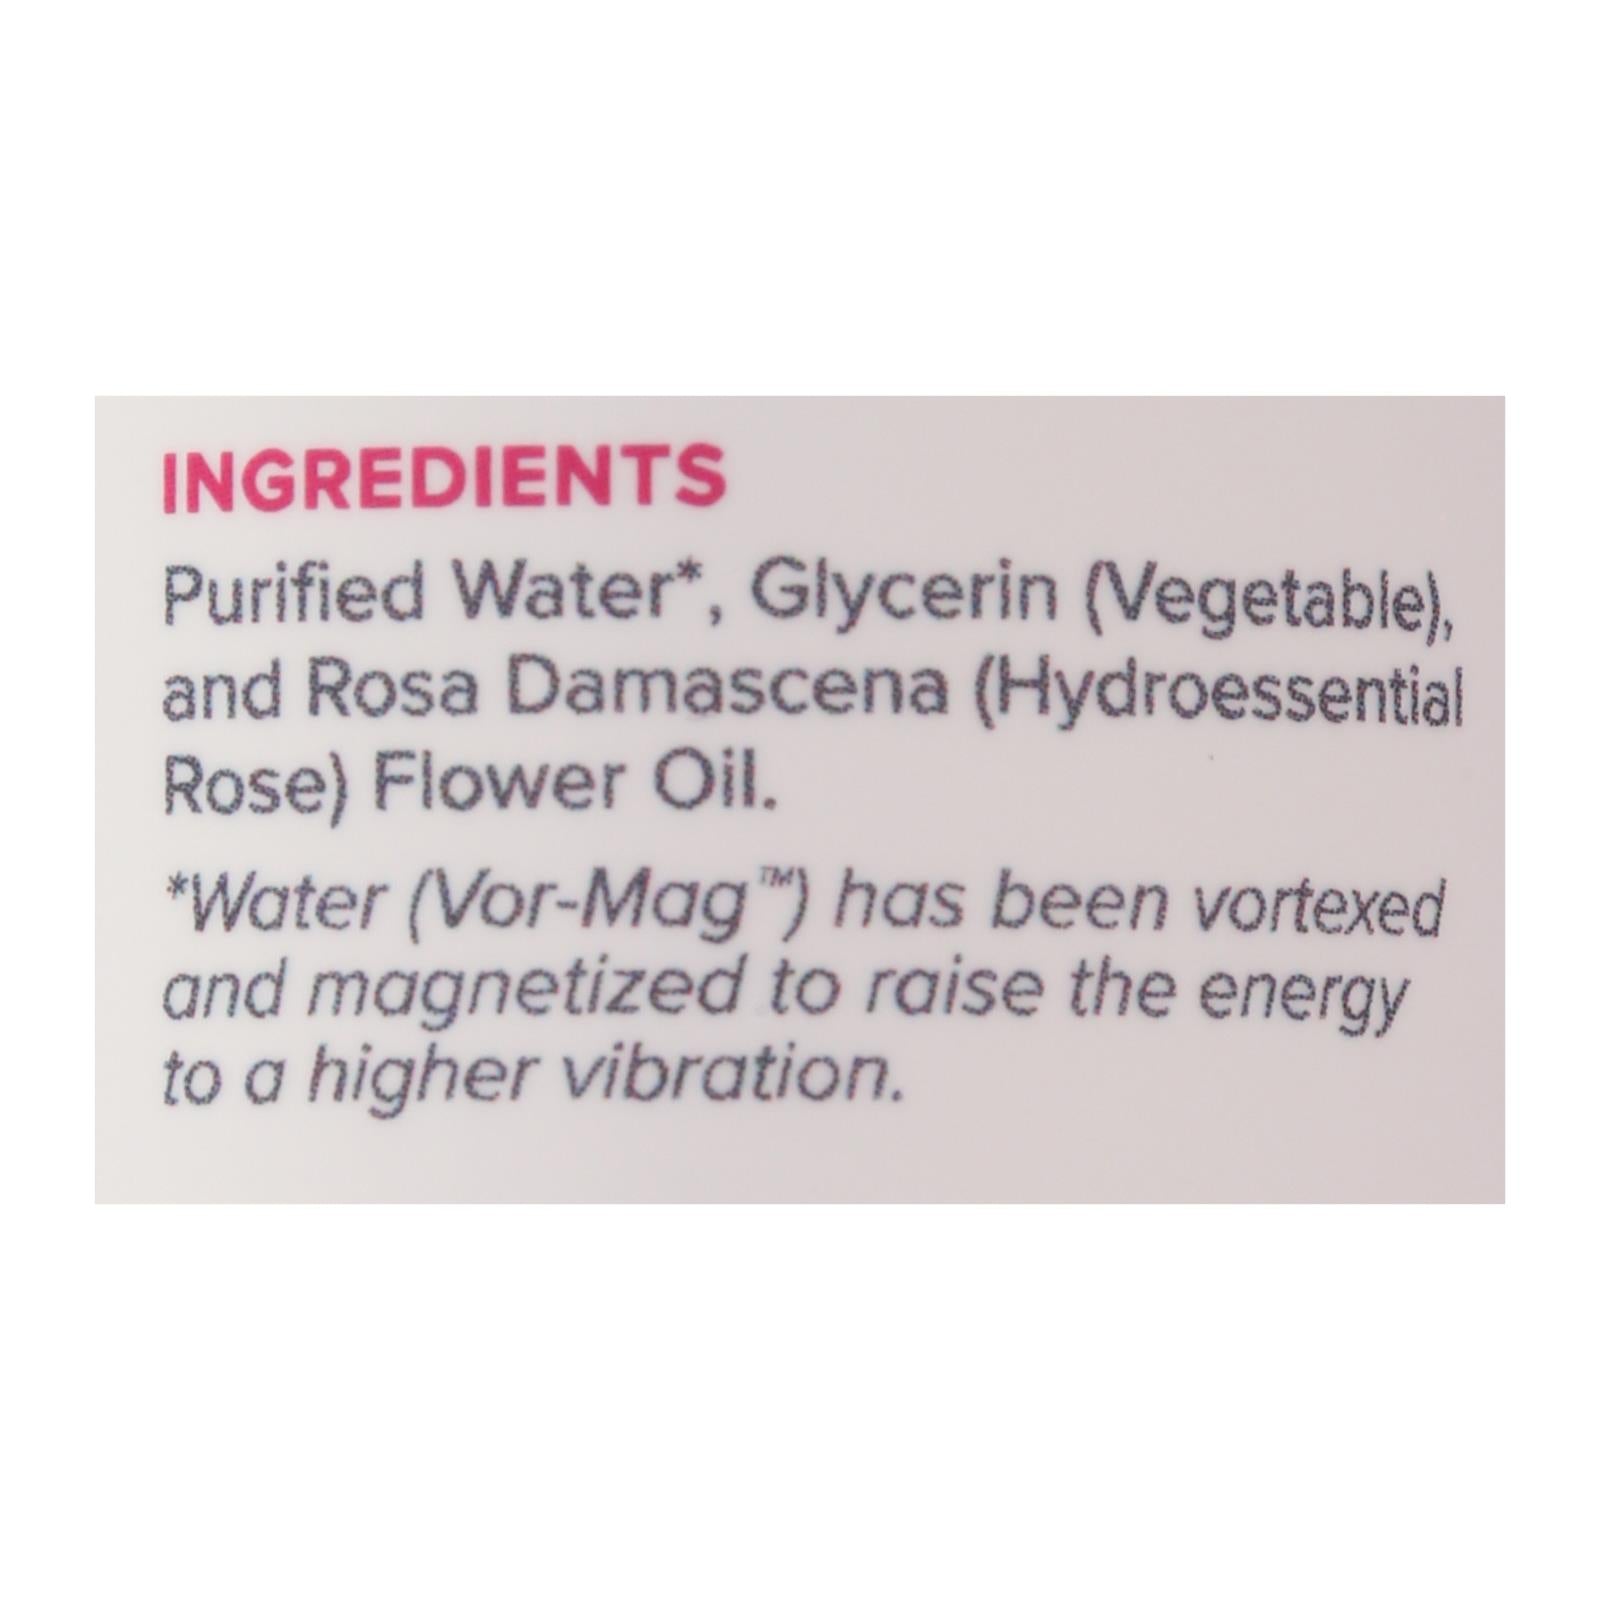 Heritage Products Rosewater and Glycerin Spray - 4 fl oz